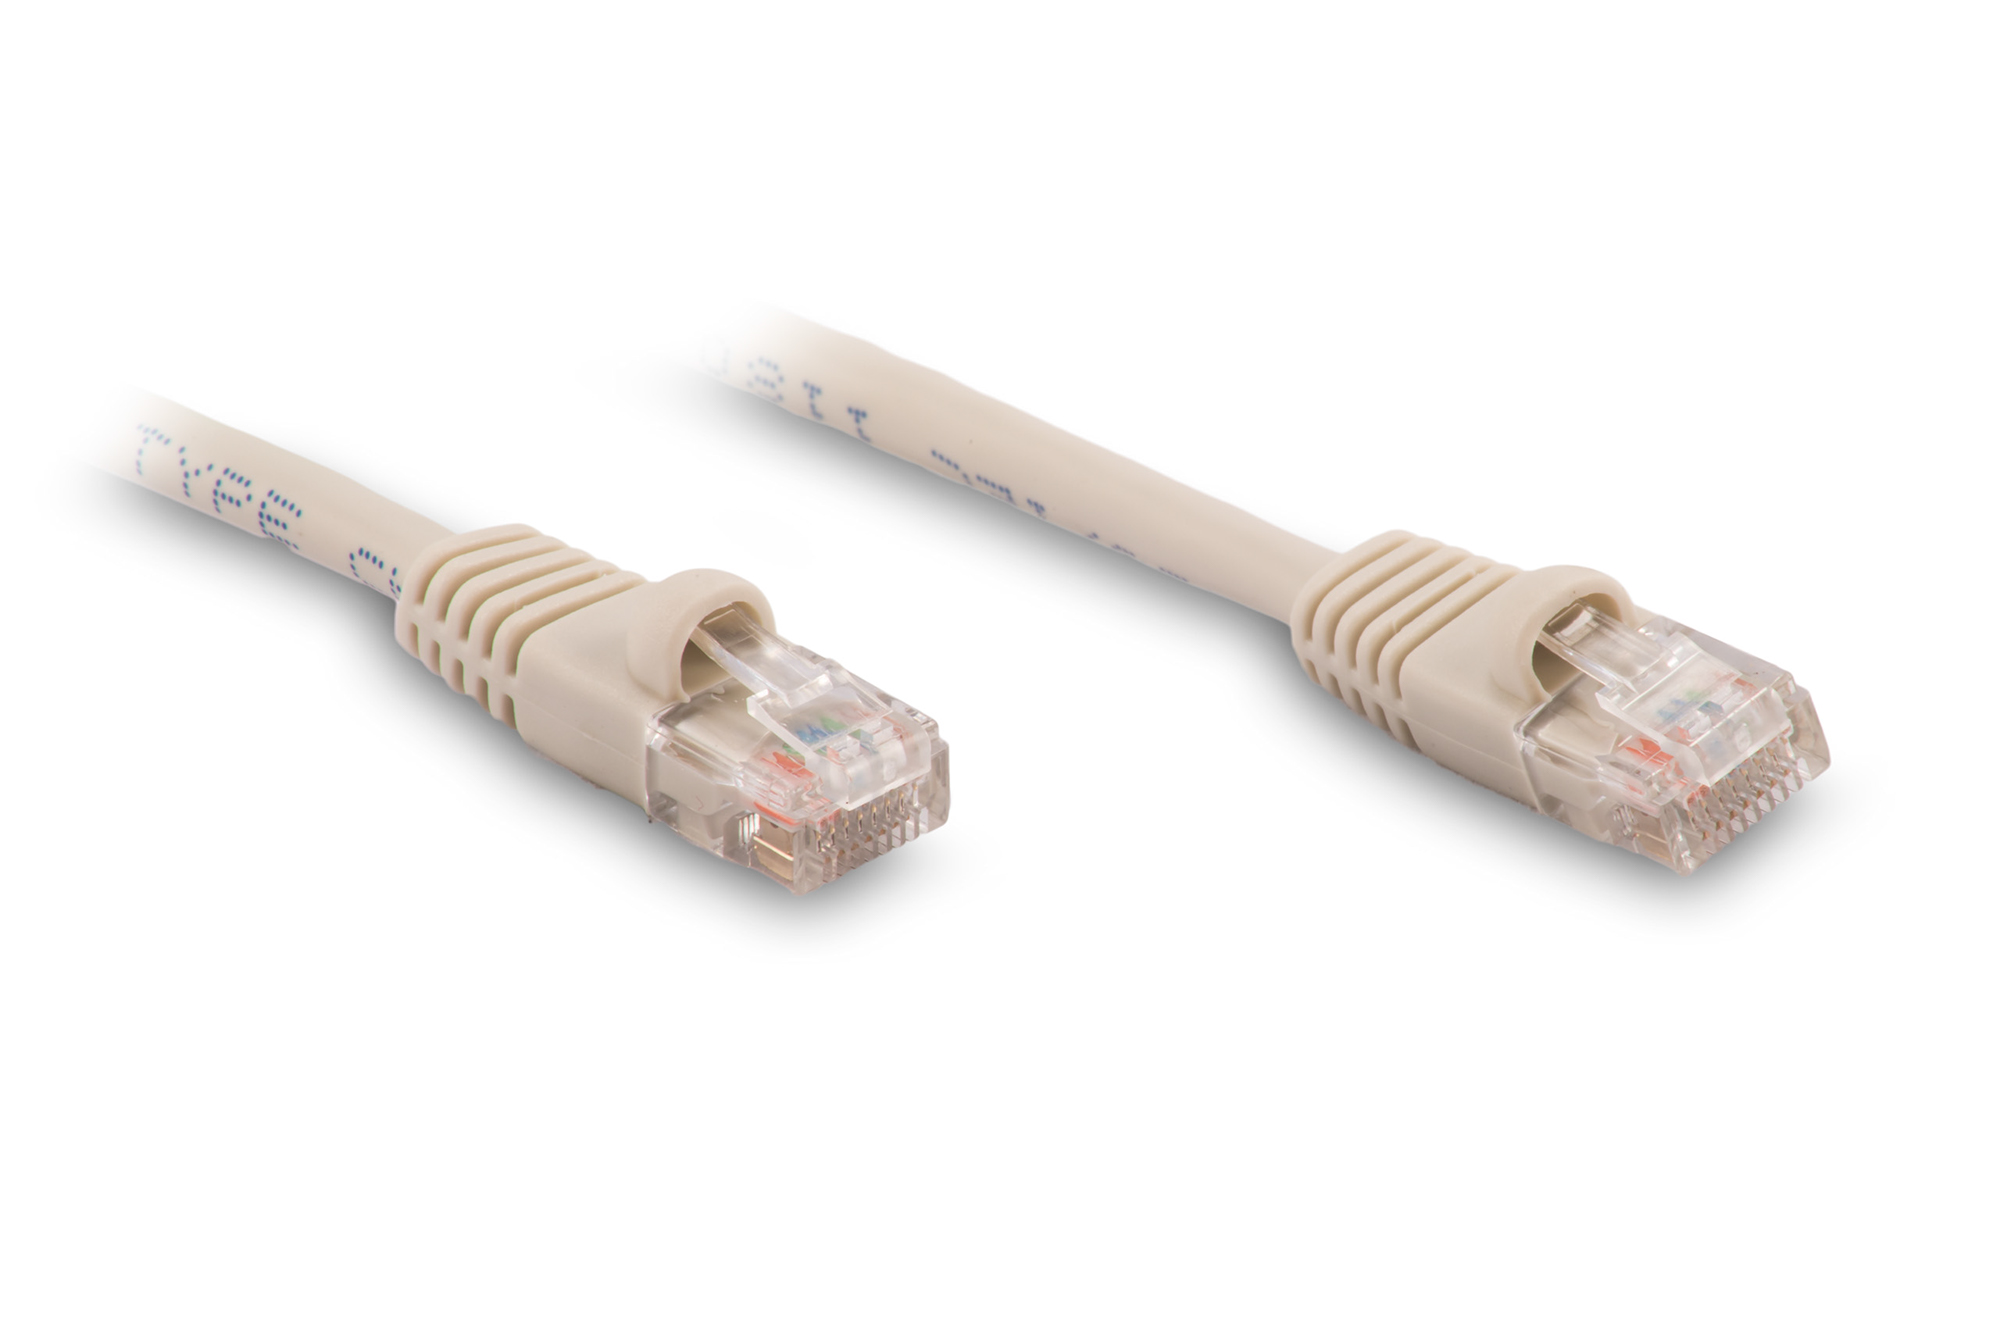 1ft Cat5e Ethernet Patch Cable - Gray Color - Snagless Boot